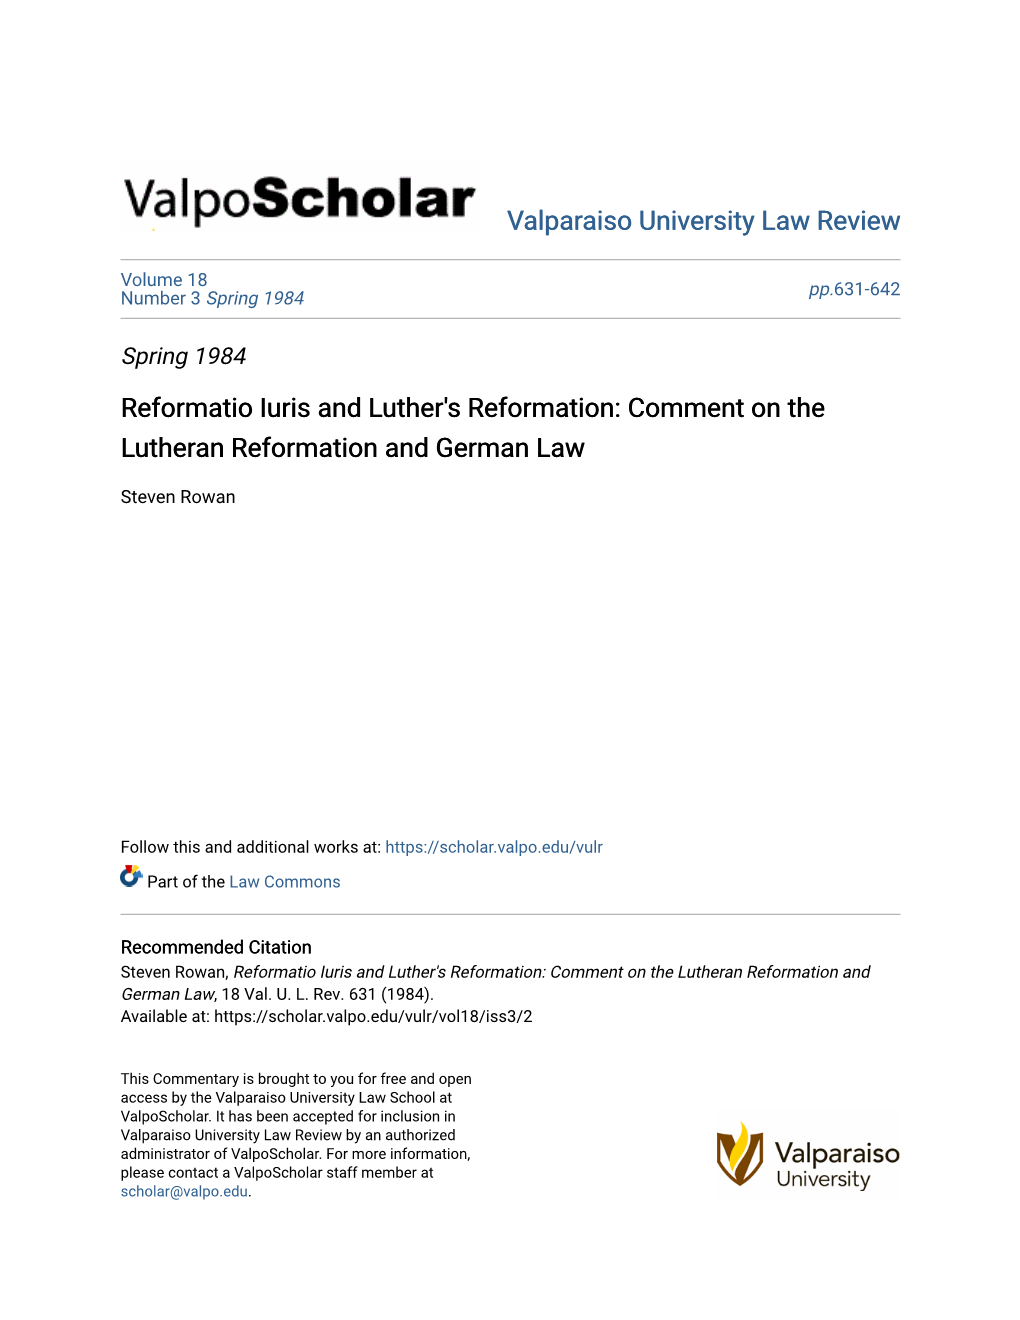 Reformatio Iuris and Luther's Reformation: Comment on the Lutheran Reformation and German Law